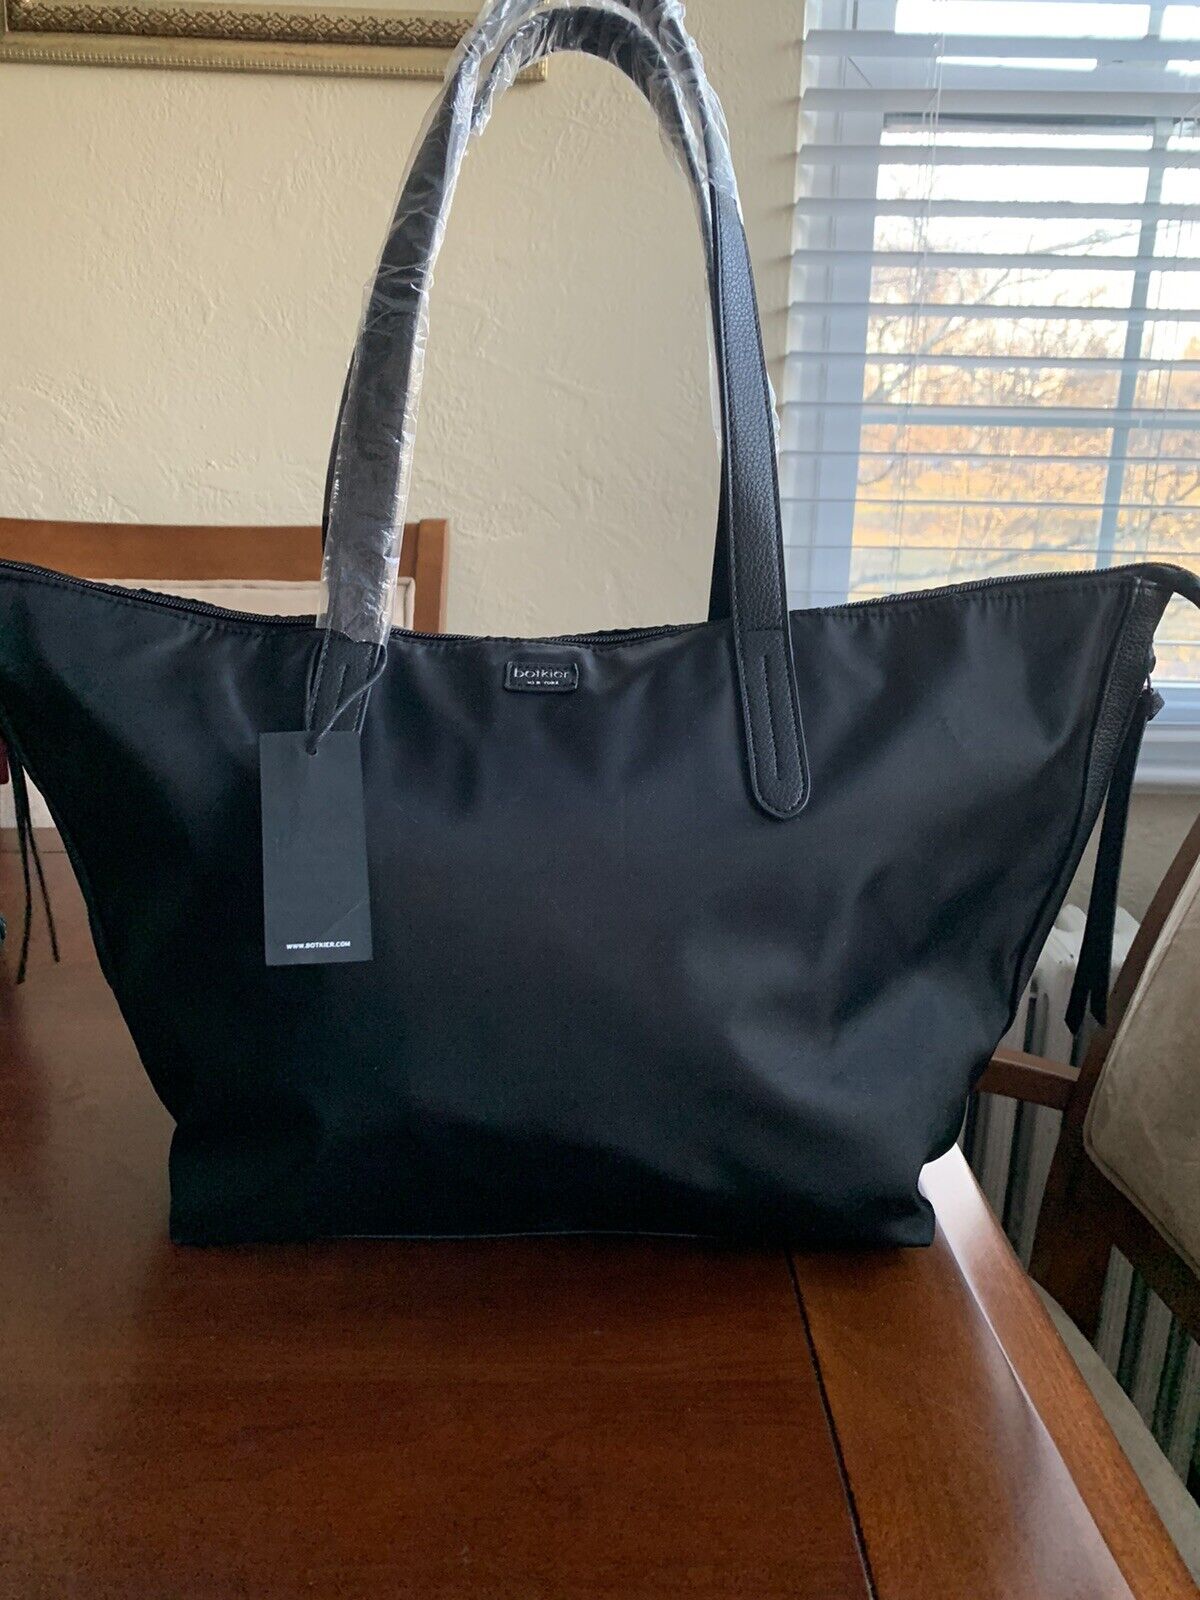 BOTKIER NEW YORK Nylon Black Roomy Tote Bag With Side Zippers New W/ Tags